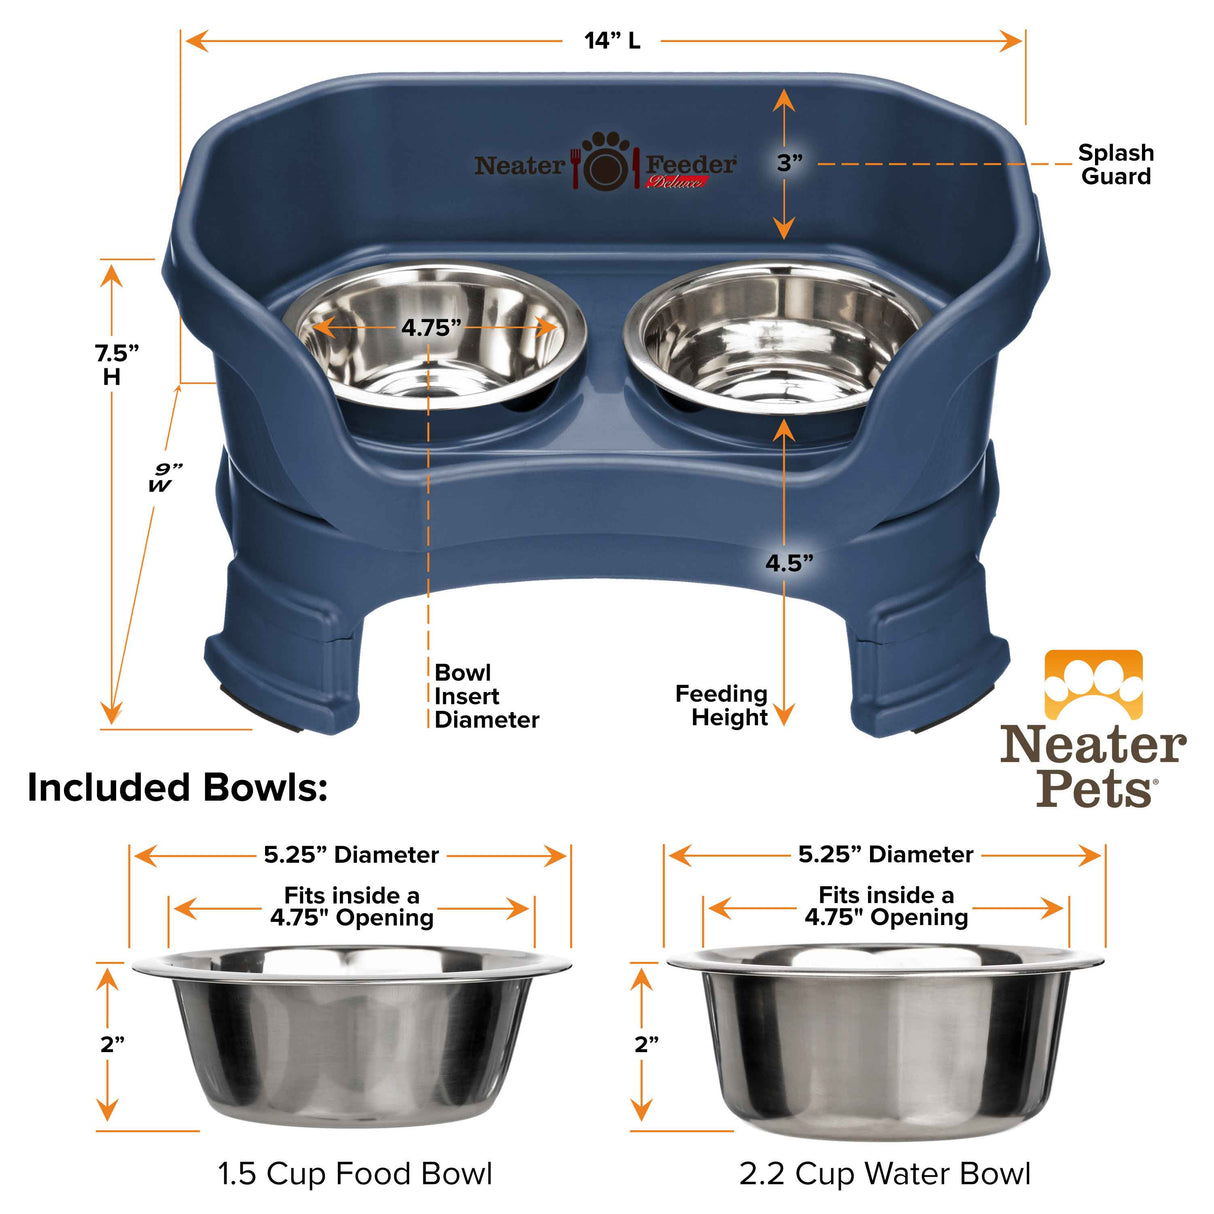 Deluxe Dark Blue Small Dog Neater Feeder with leg extensions and Bowl dimensions